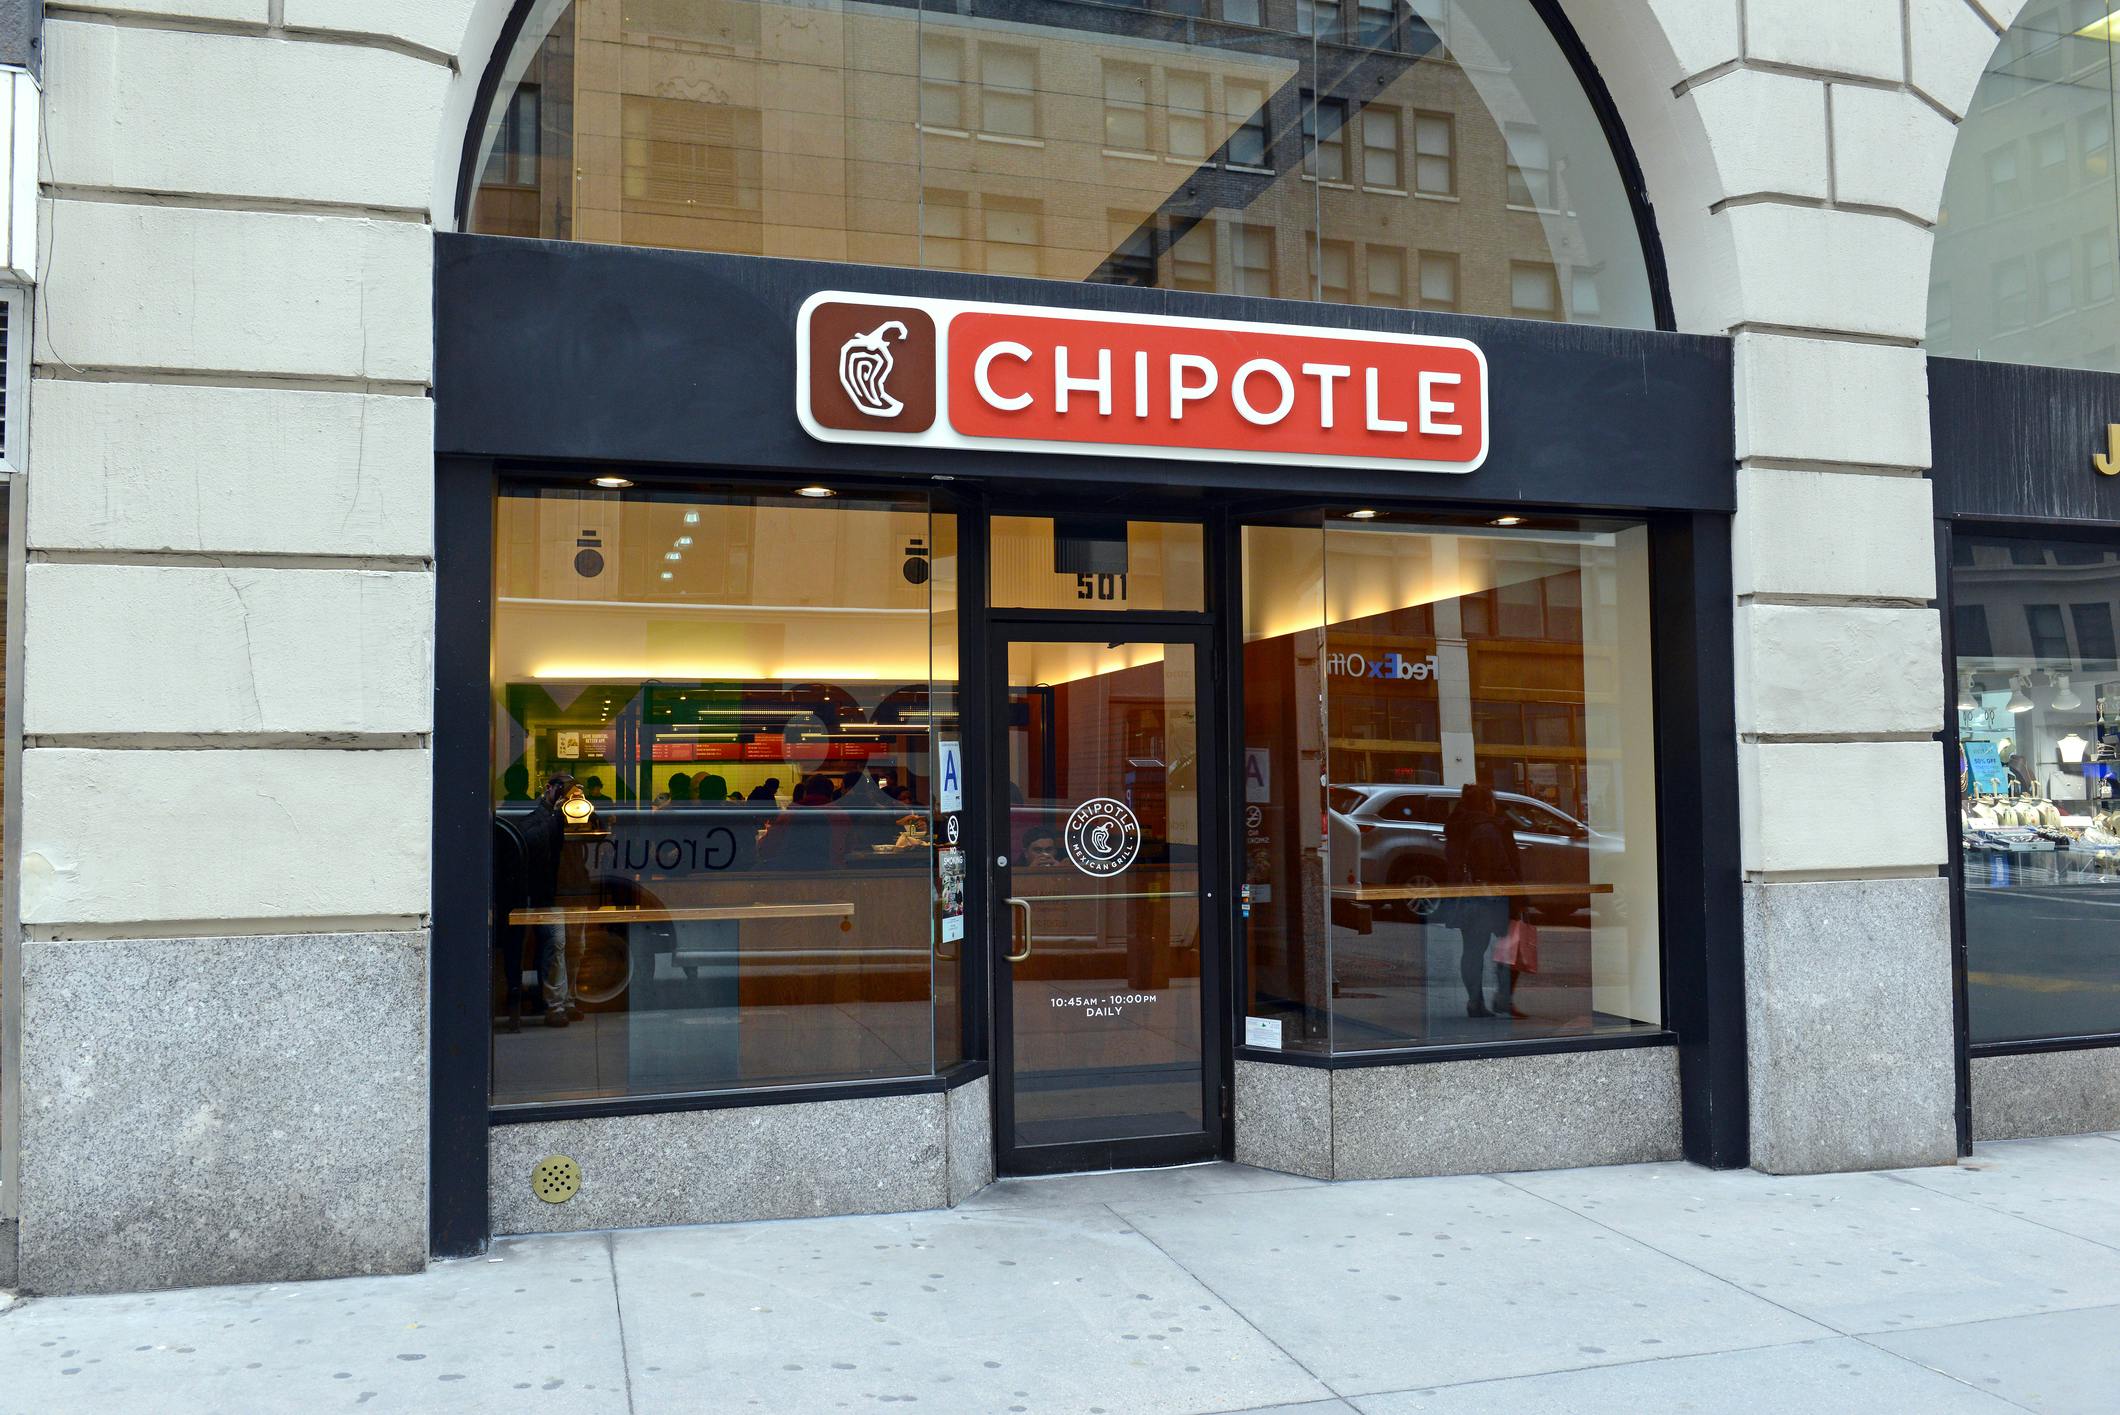 Chipotle storefront